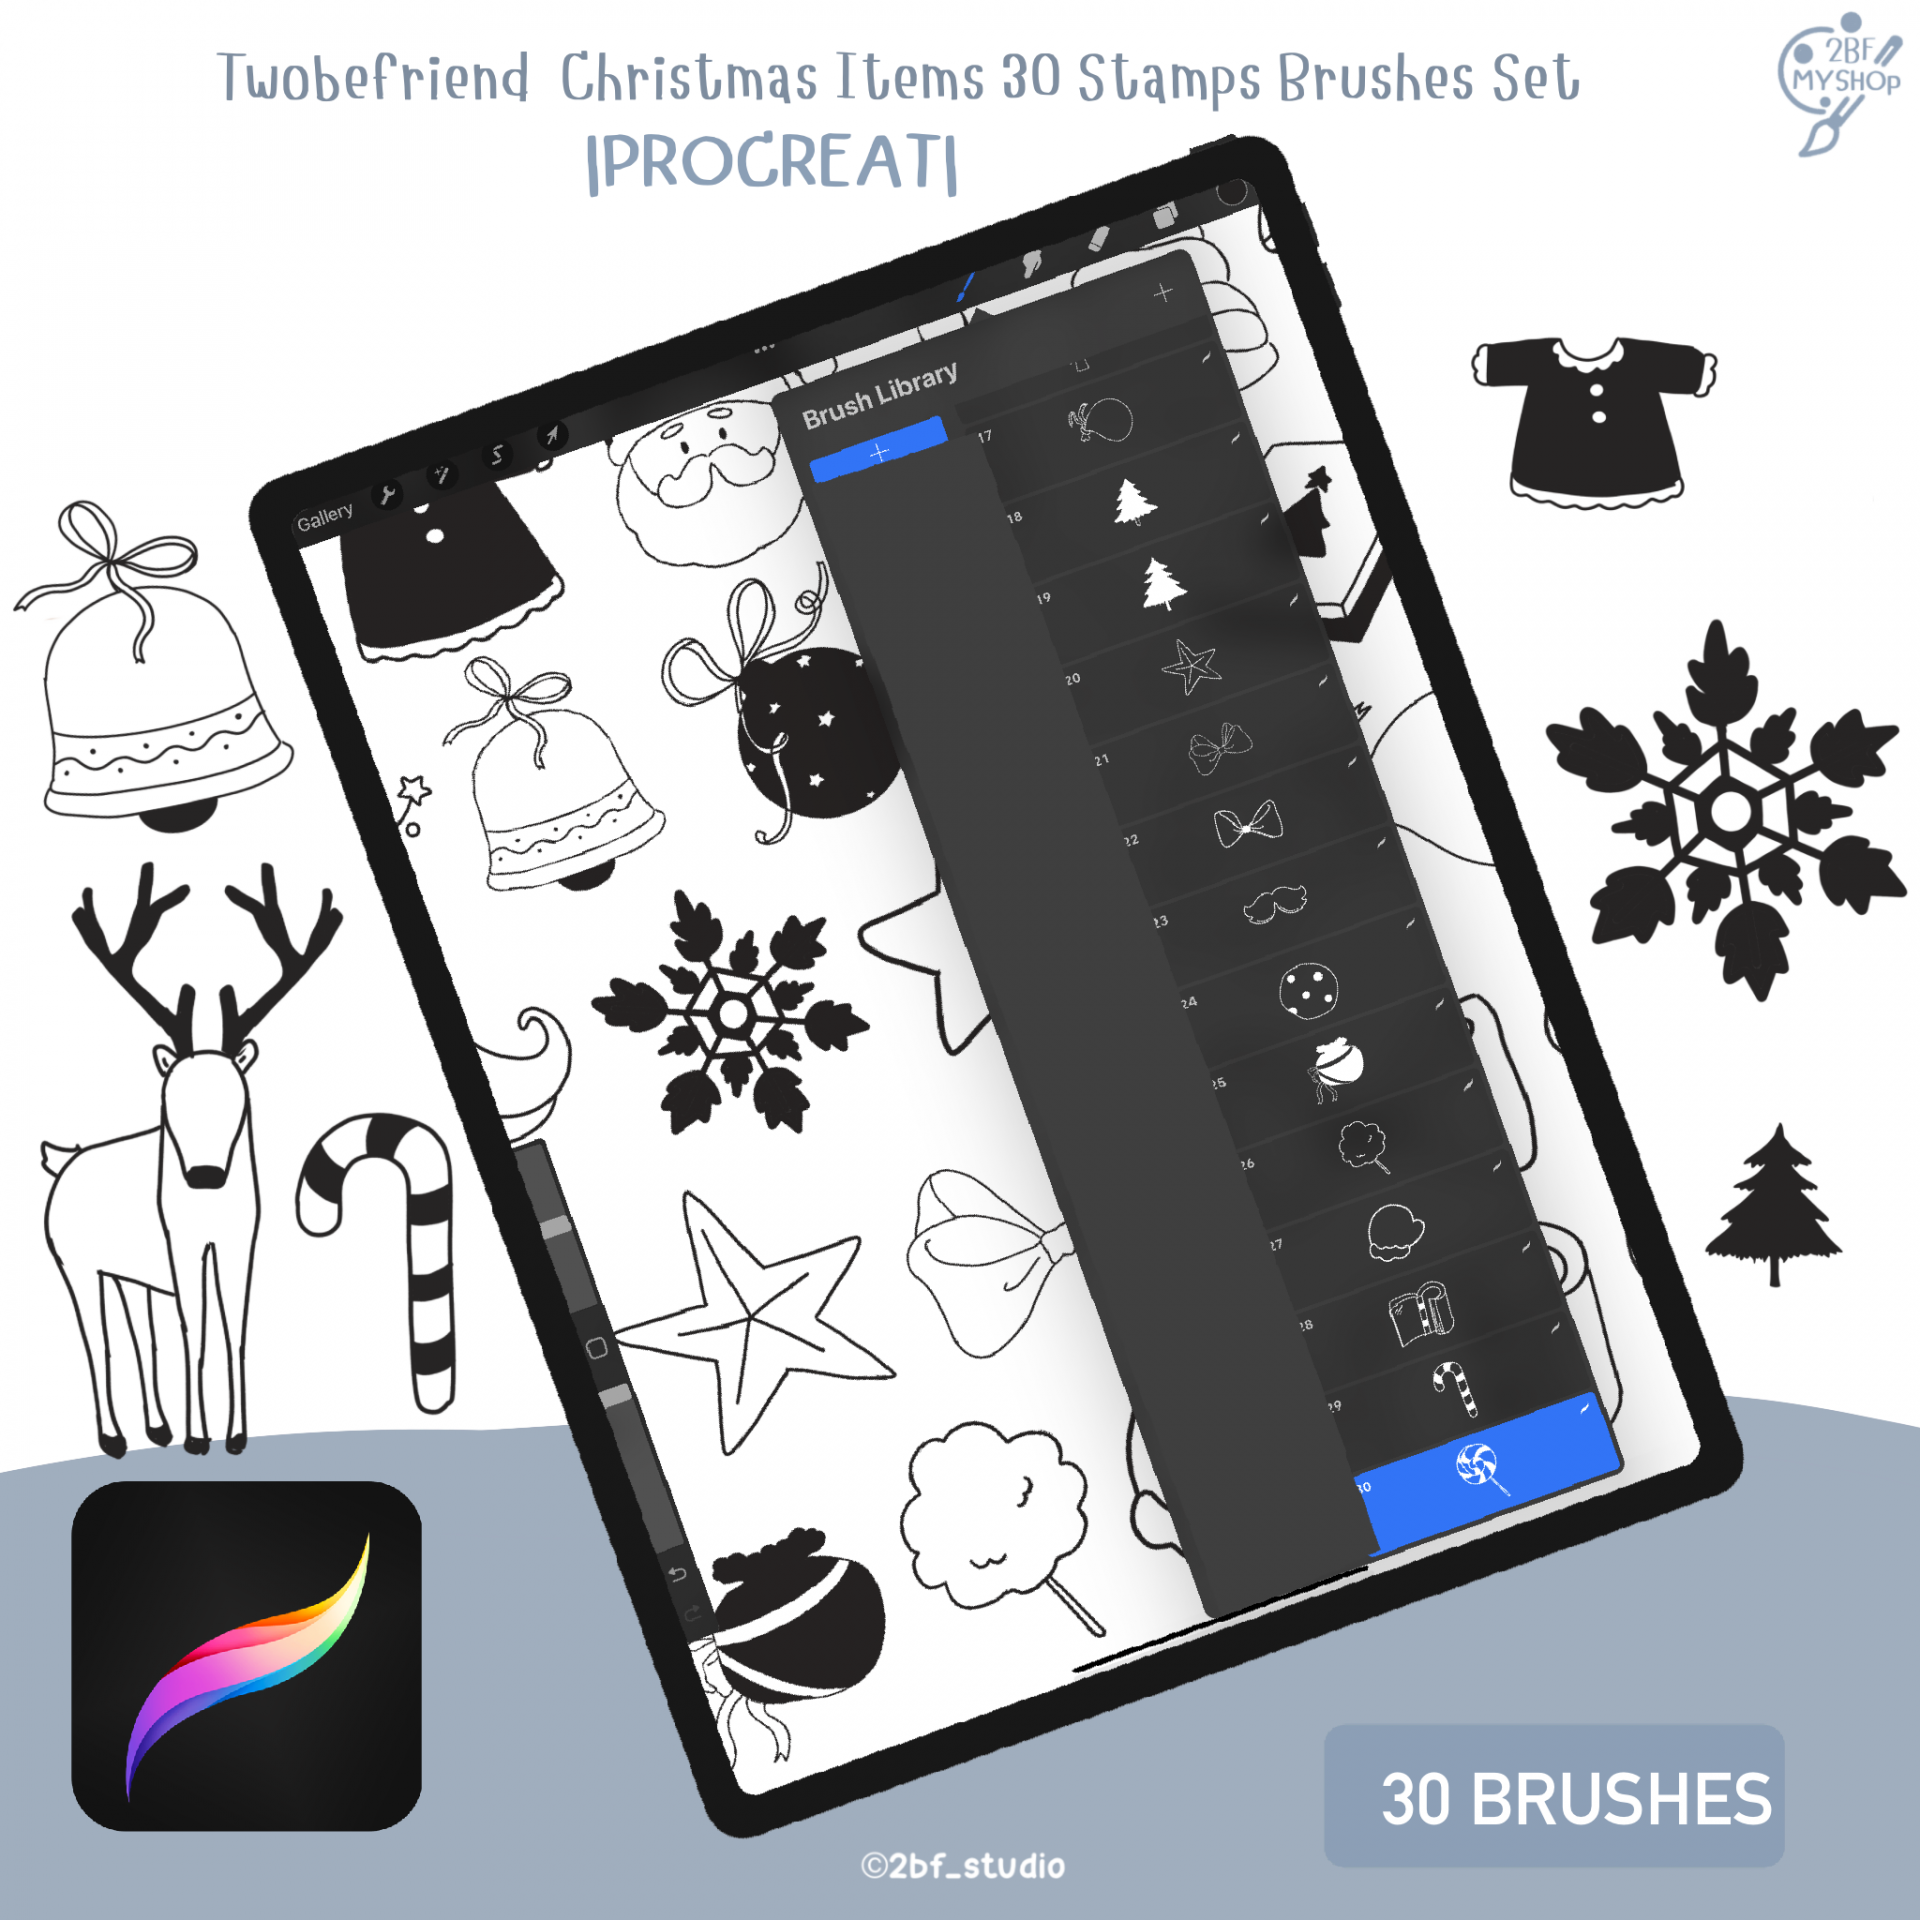 Twobefriend  Christmas Items 30 Stamps Brushes Set  |PROCREAT BRUSHED |